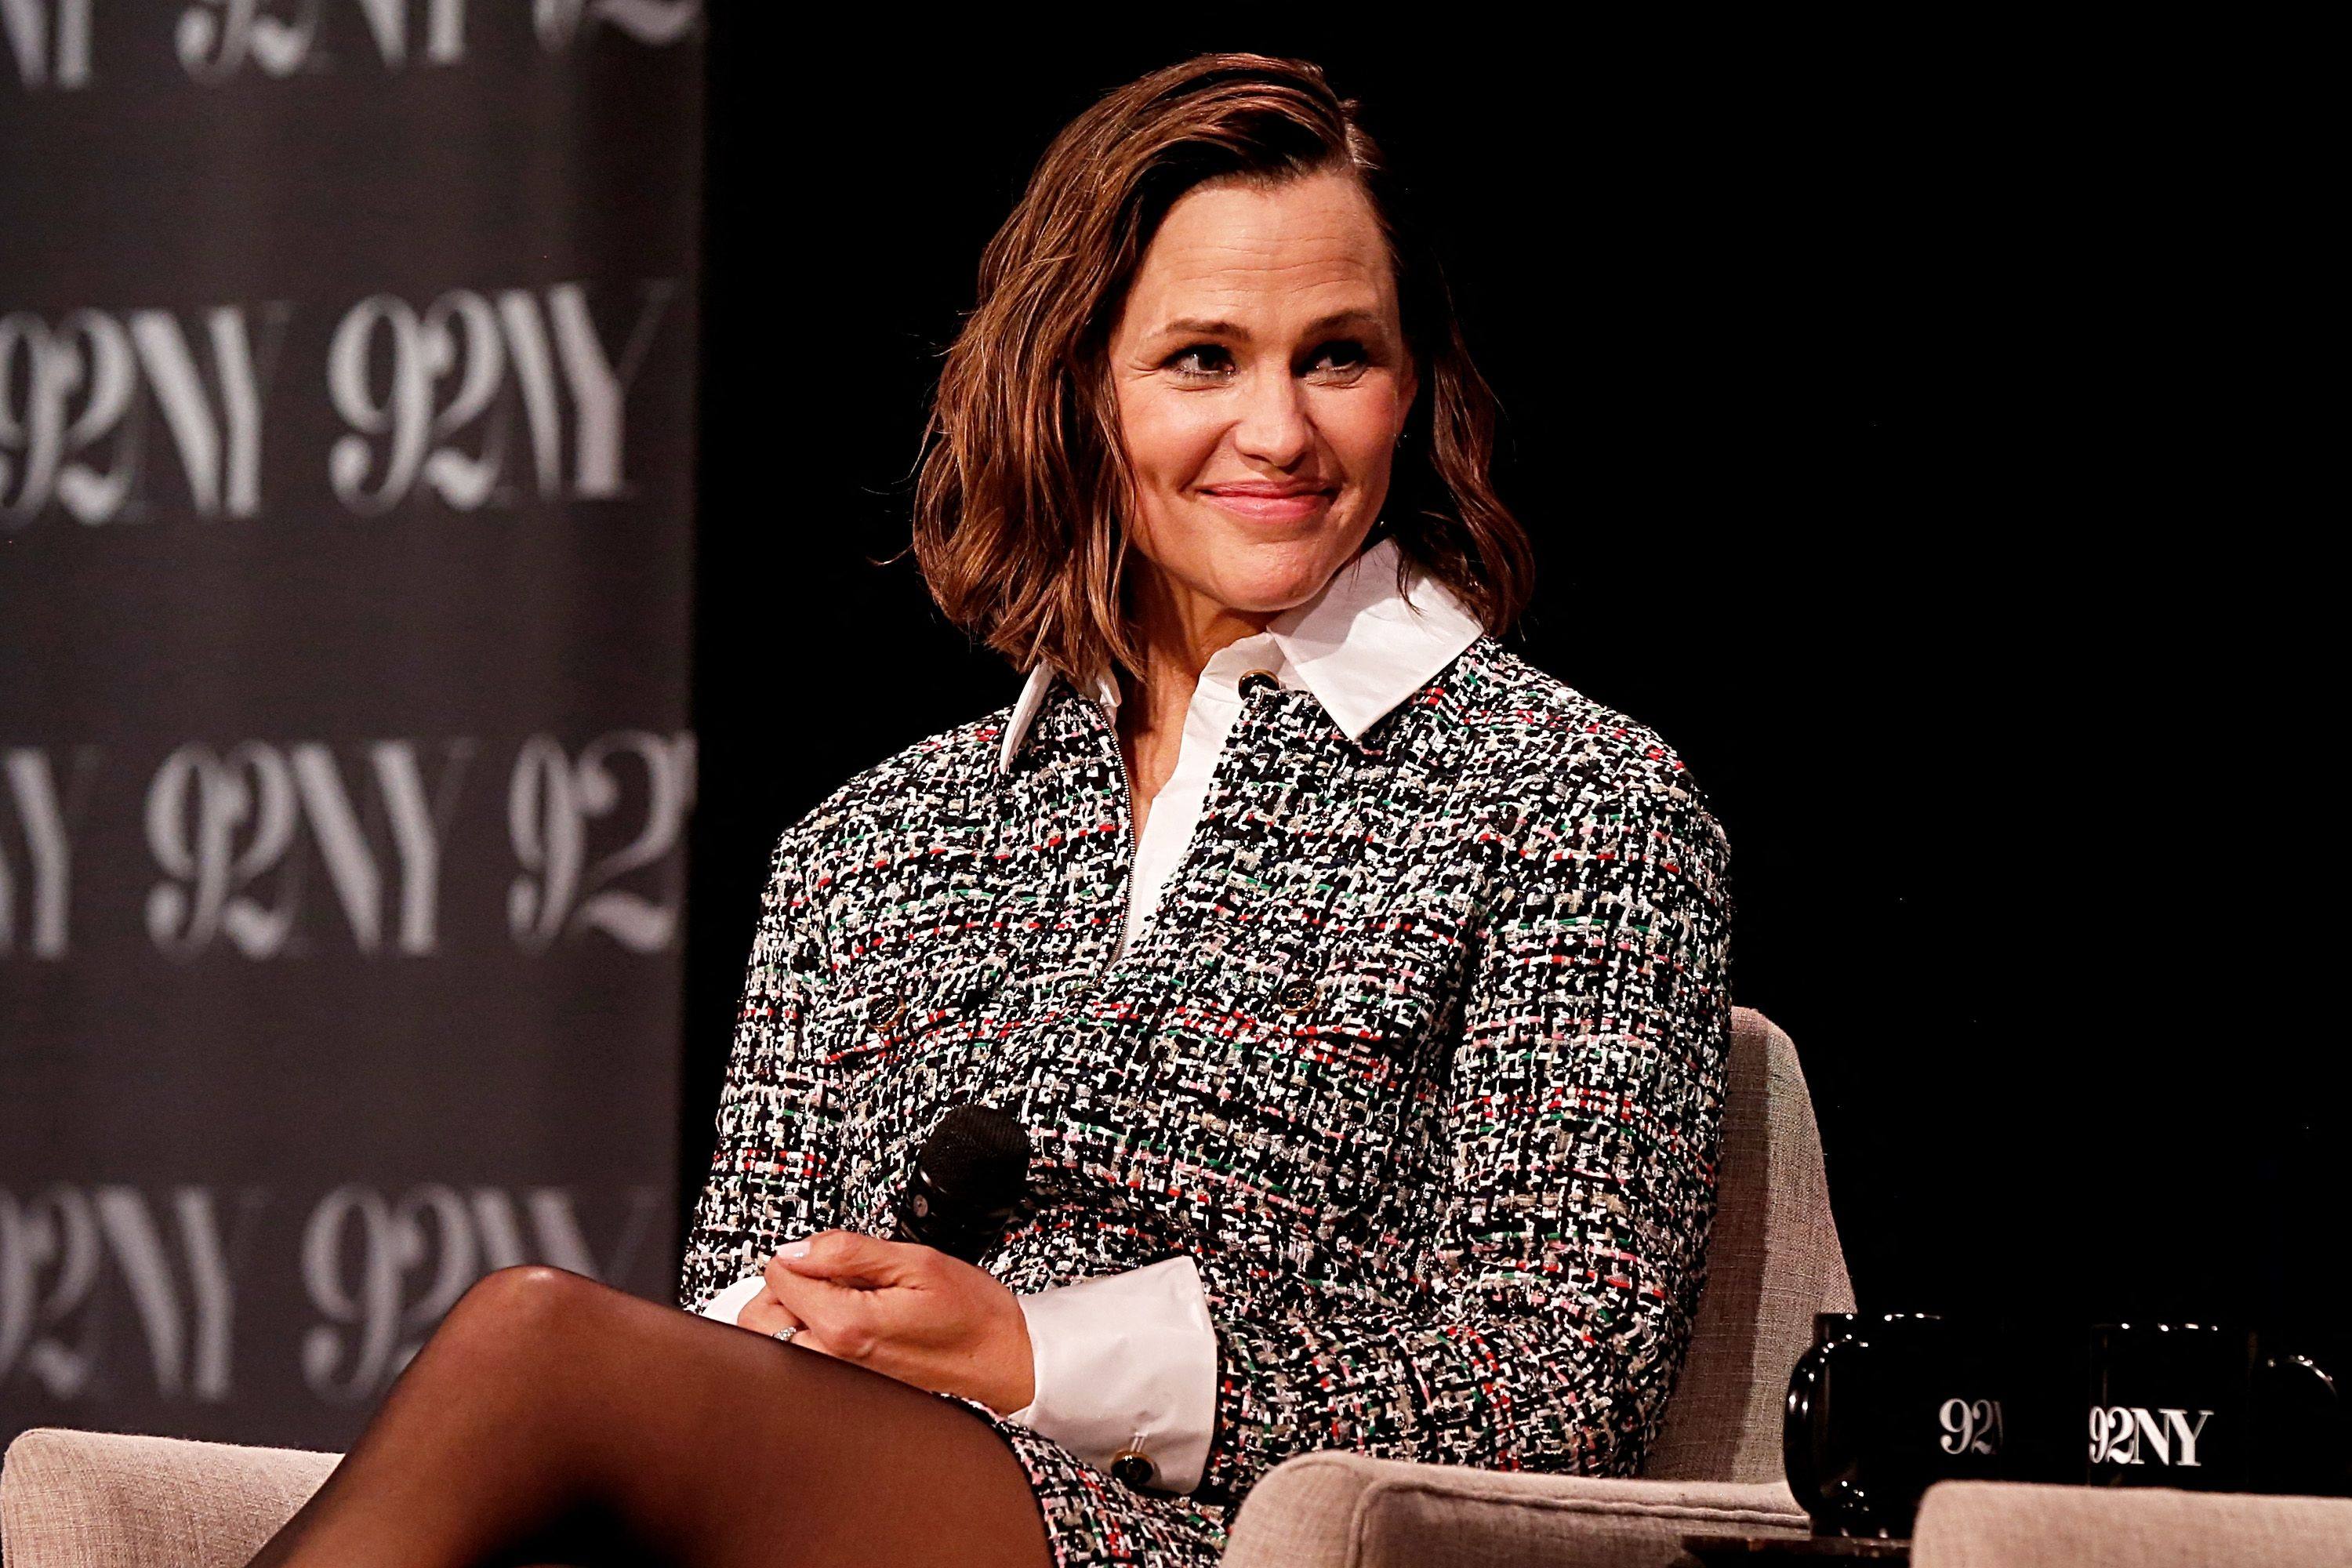 Jennifer Garner attends a conversation and screening for the new Apple TV+ series “The Last Thing He Told Me” in New York on April 11, 2023. She was offered the lead role after Julia Roberts dropped out. Photo: Getty Images via AFP